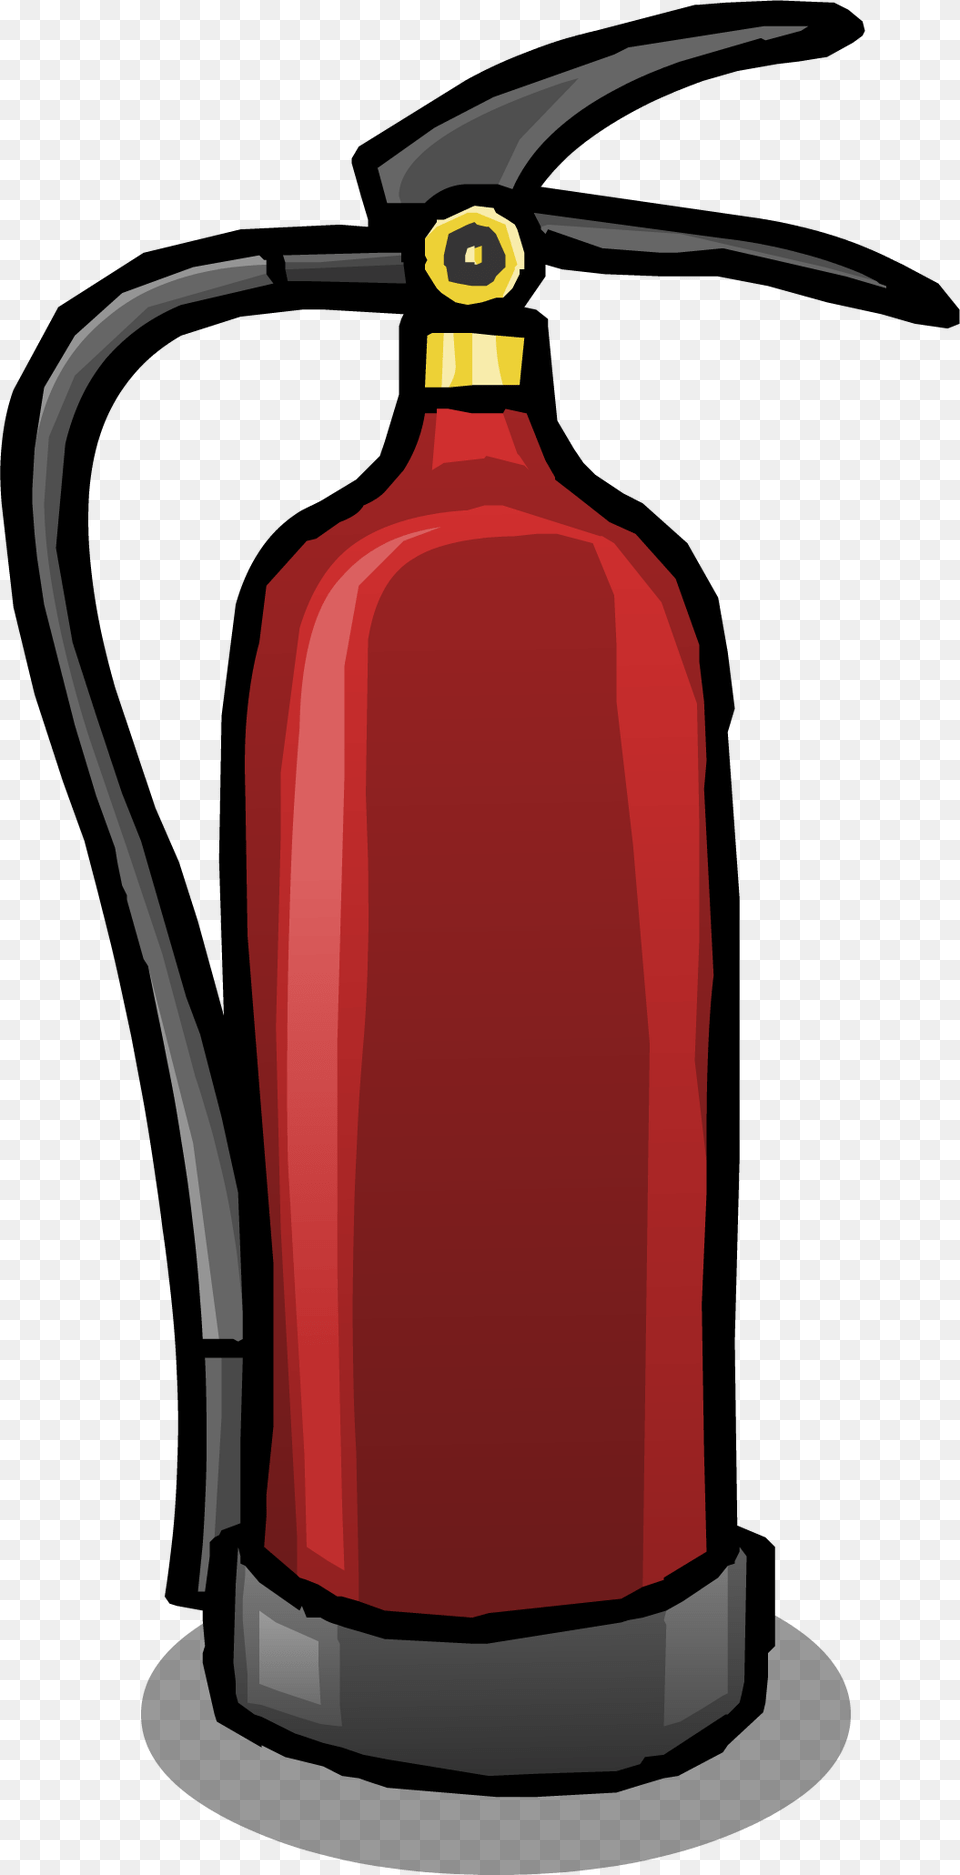 Fire Extinguisher Sprite, Cylinder, Smoke Pipe Png